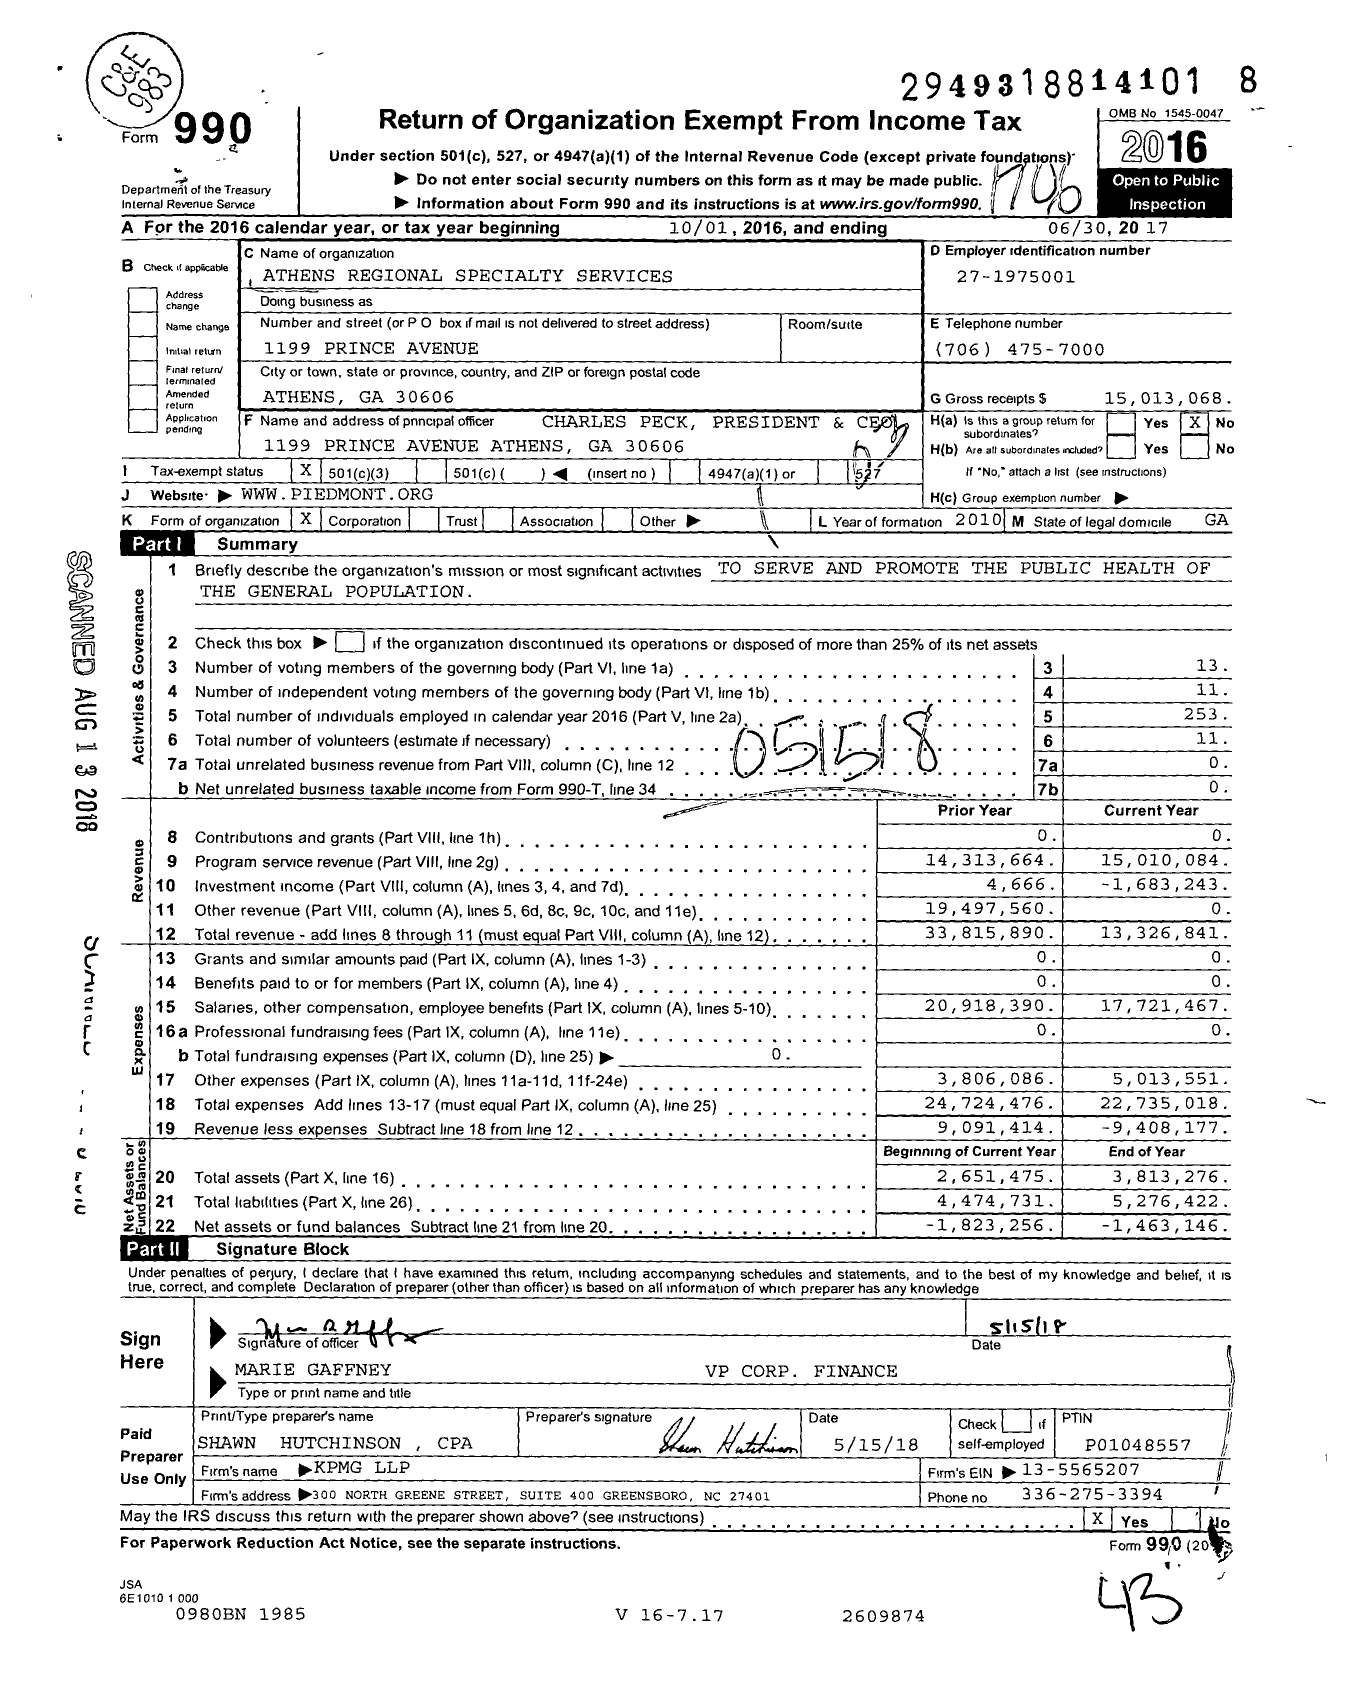 Image of first page of 2016 Form 990 for Athens Regional Specialty Services